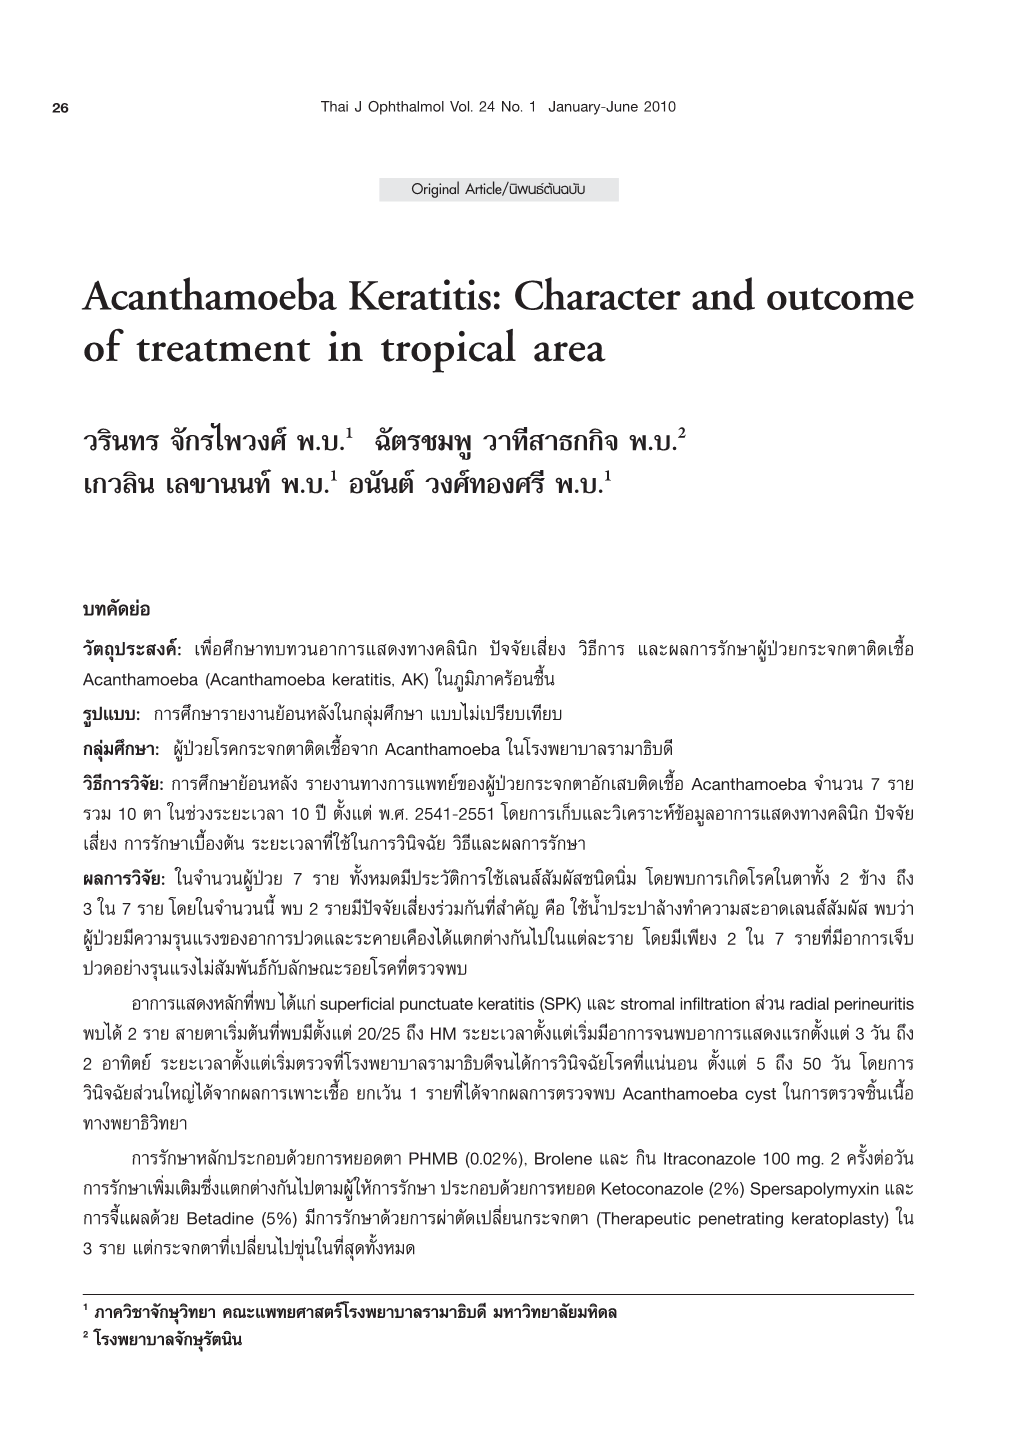 Acanthamoeba Keratitis: Character and Outcome of Treatment in Tropical Area